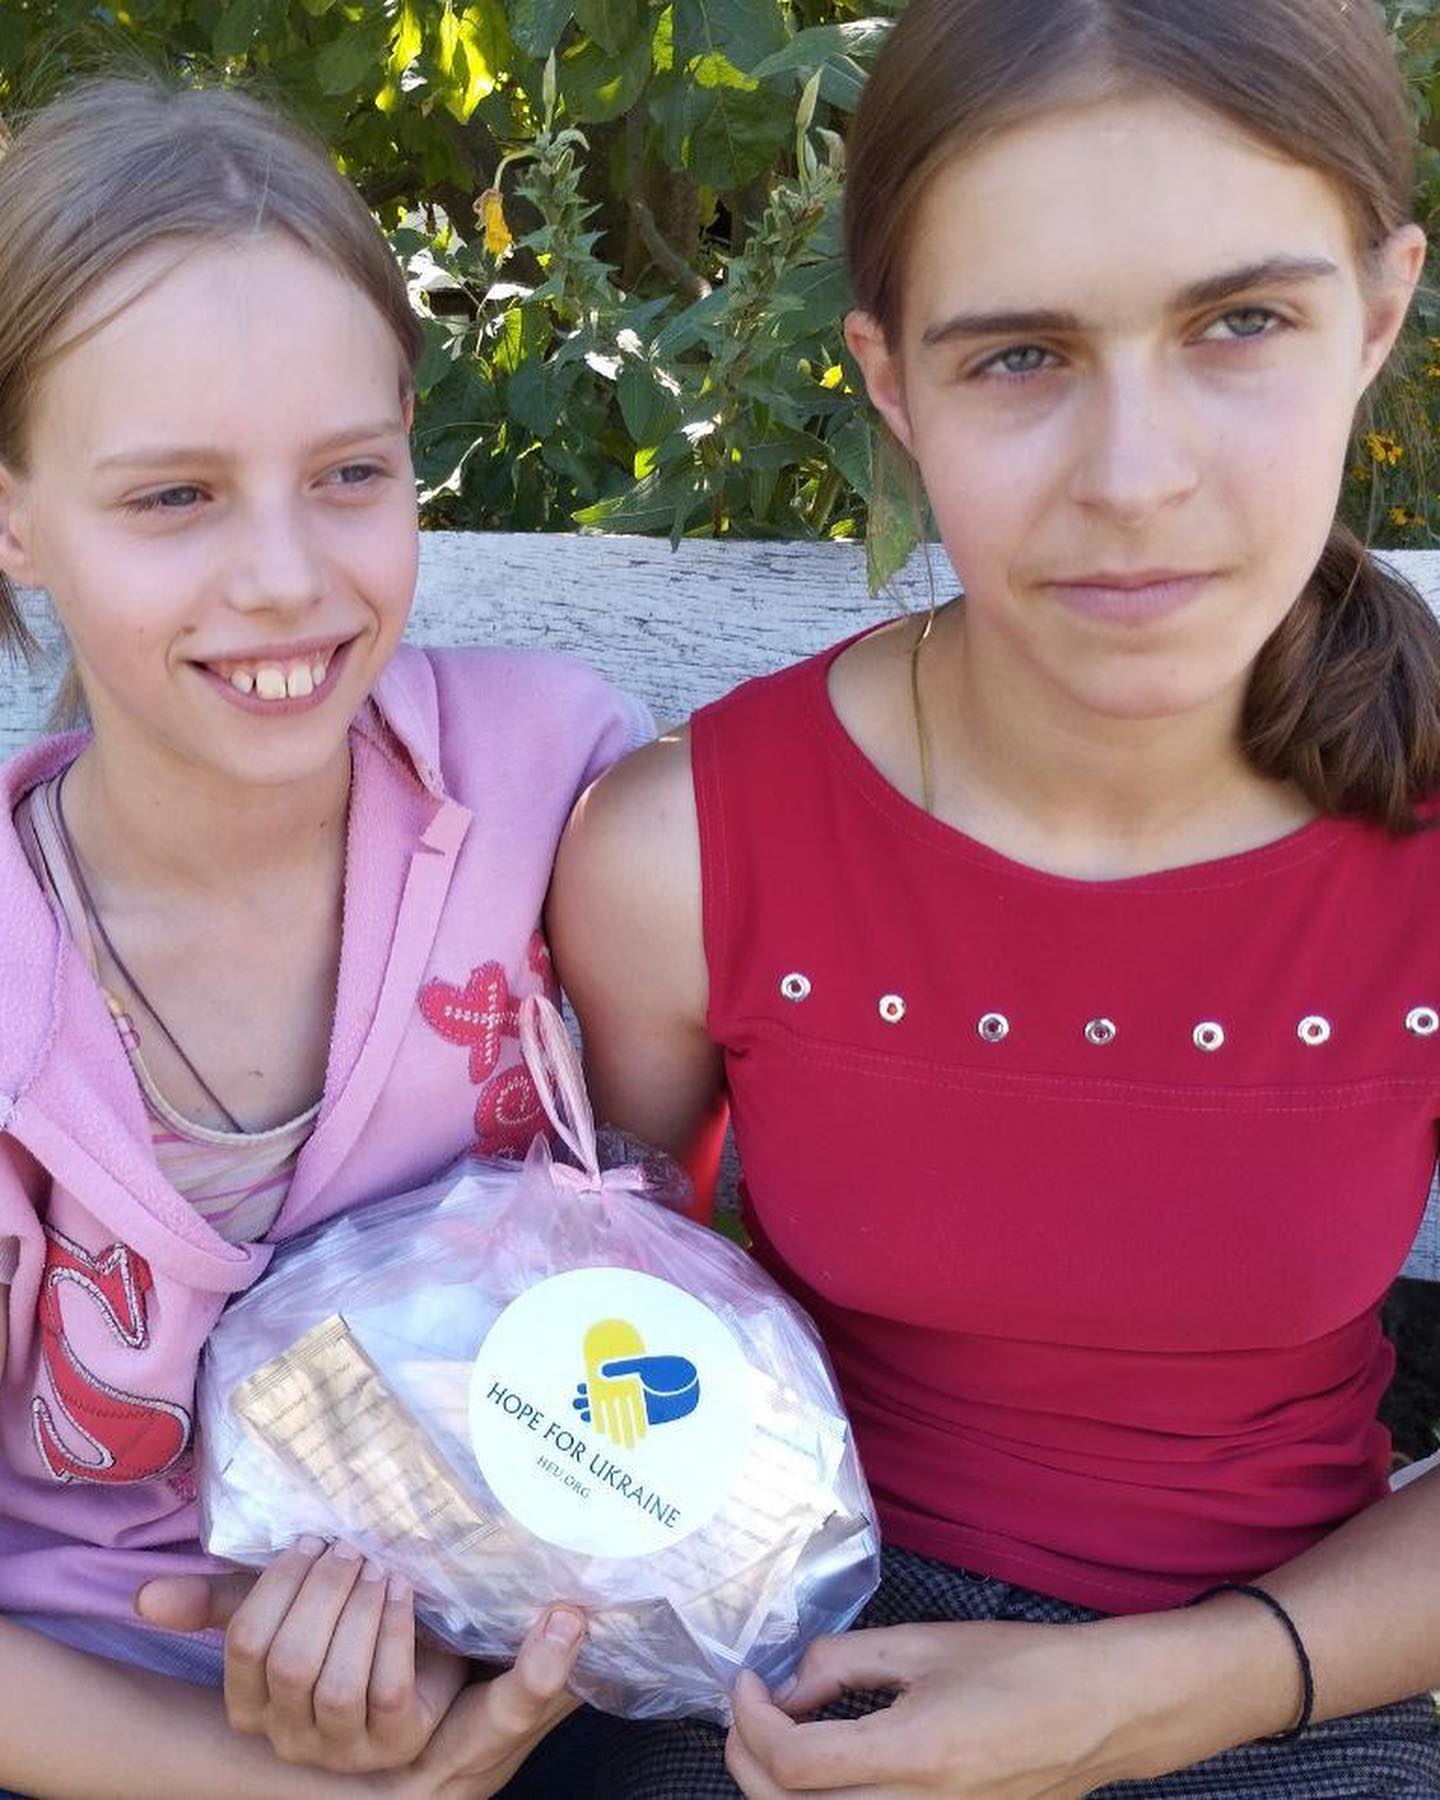 Two girls sitting on a bench holding a bag of cookies.